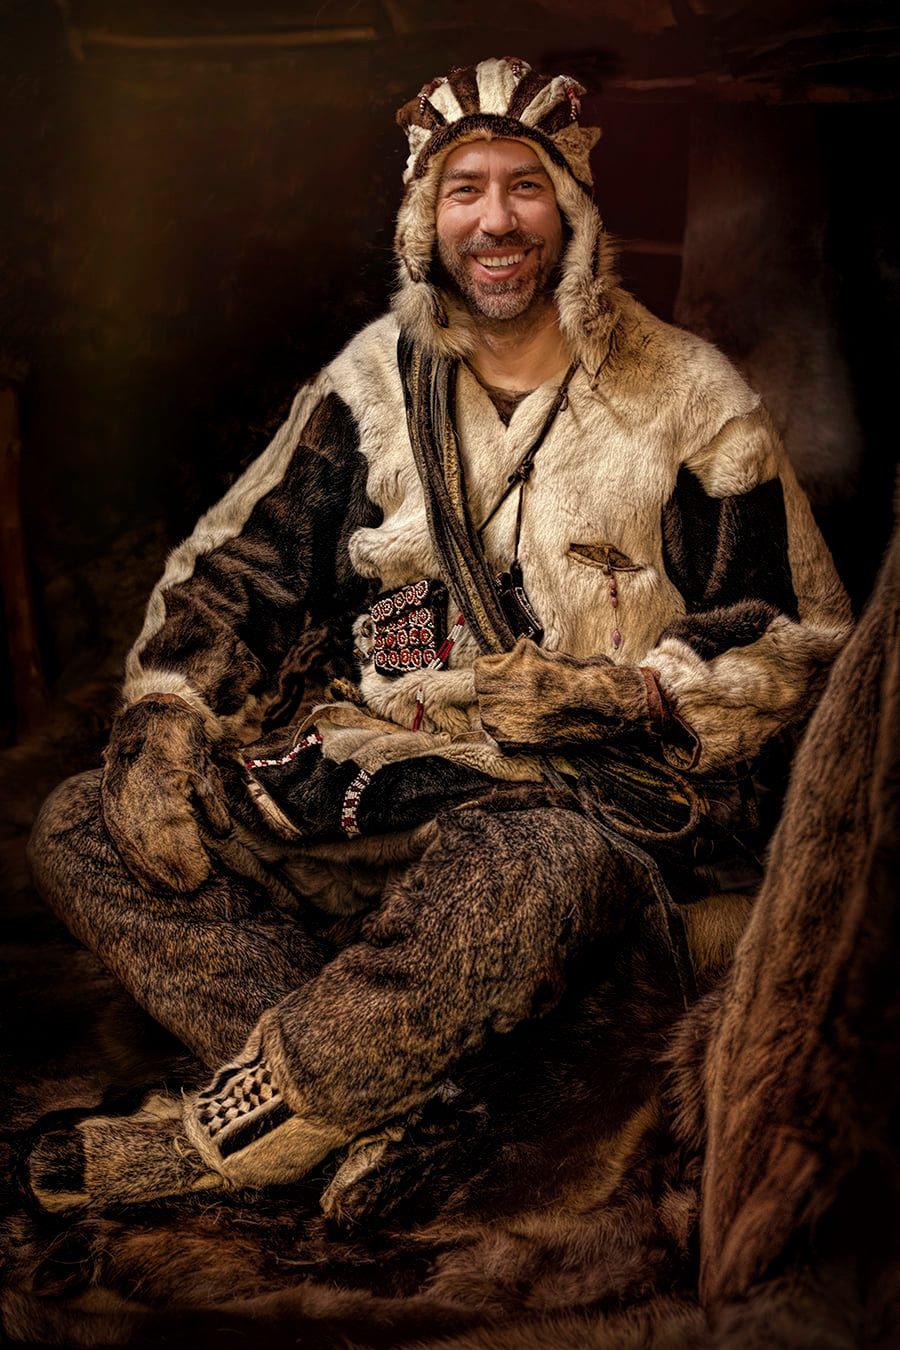 Alexander Khimushin in traditional Chukchi reindeer herders clothing (© <a href="https://www.facebook.com/xperimenter">Alexander Khimushin</a> / The World In Faces)